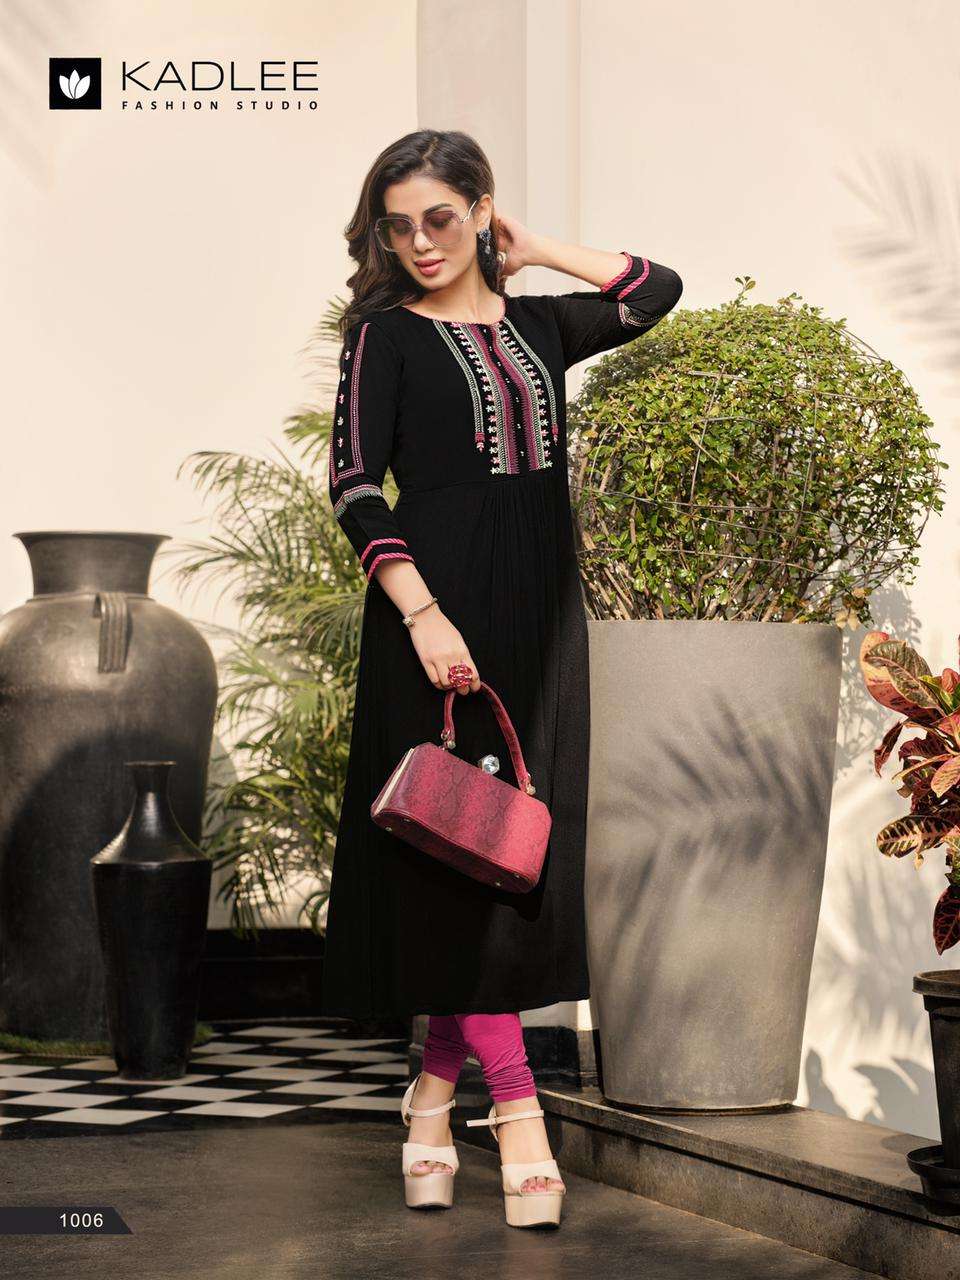 CINDERELLA BY KADLEE 1001 TO 1006 SERIES DESIGNER STYLISH FANCY COLORFUL BEAUTIFUL PARTY WEAR & ETHNIC WEAR COLLECTION RAYON EMBROIDERED KURTIS AT WHOLESALE PRICE